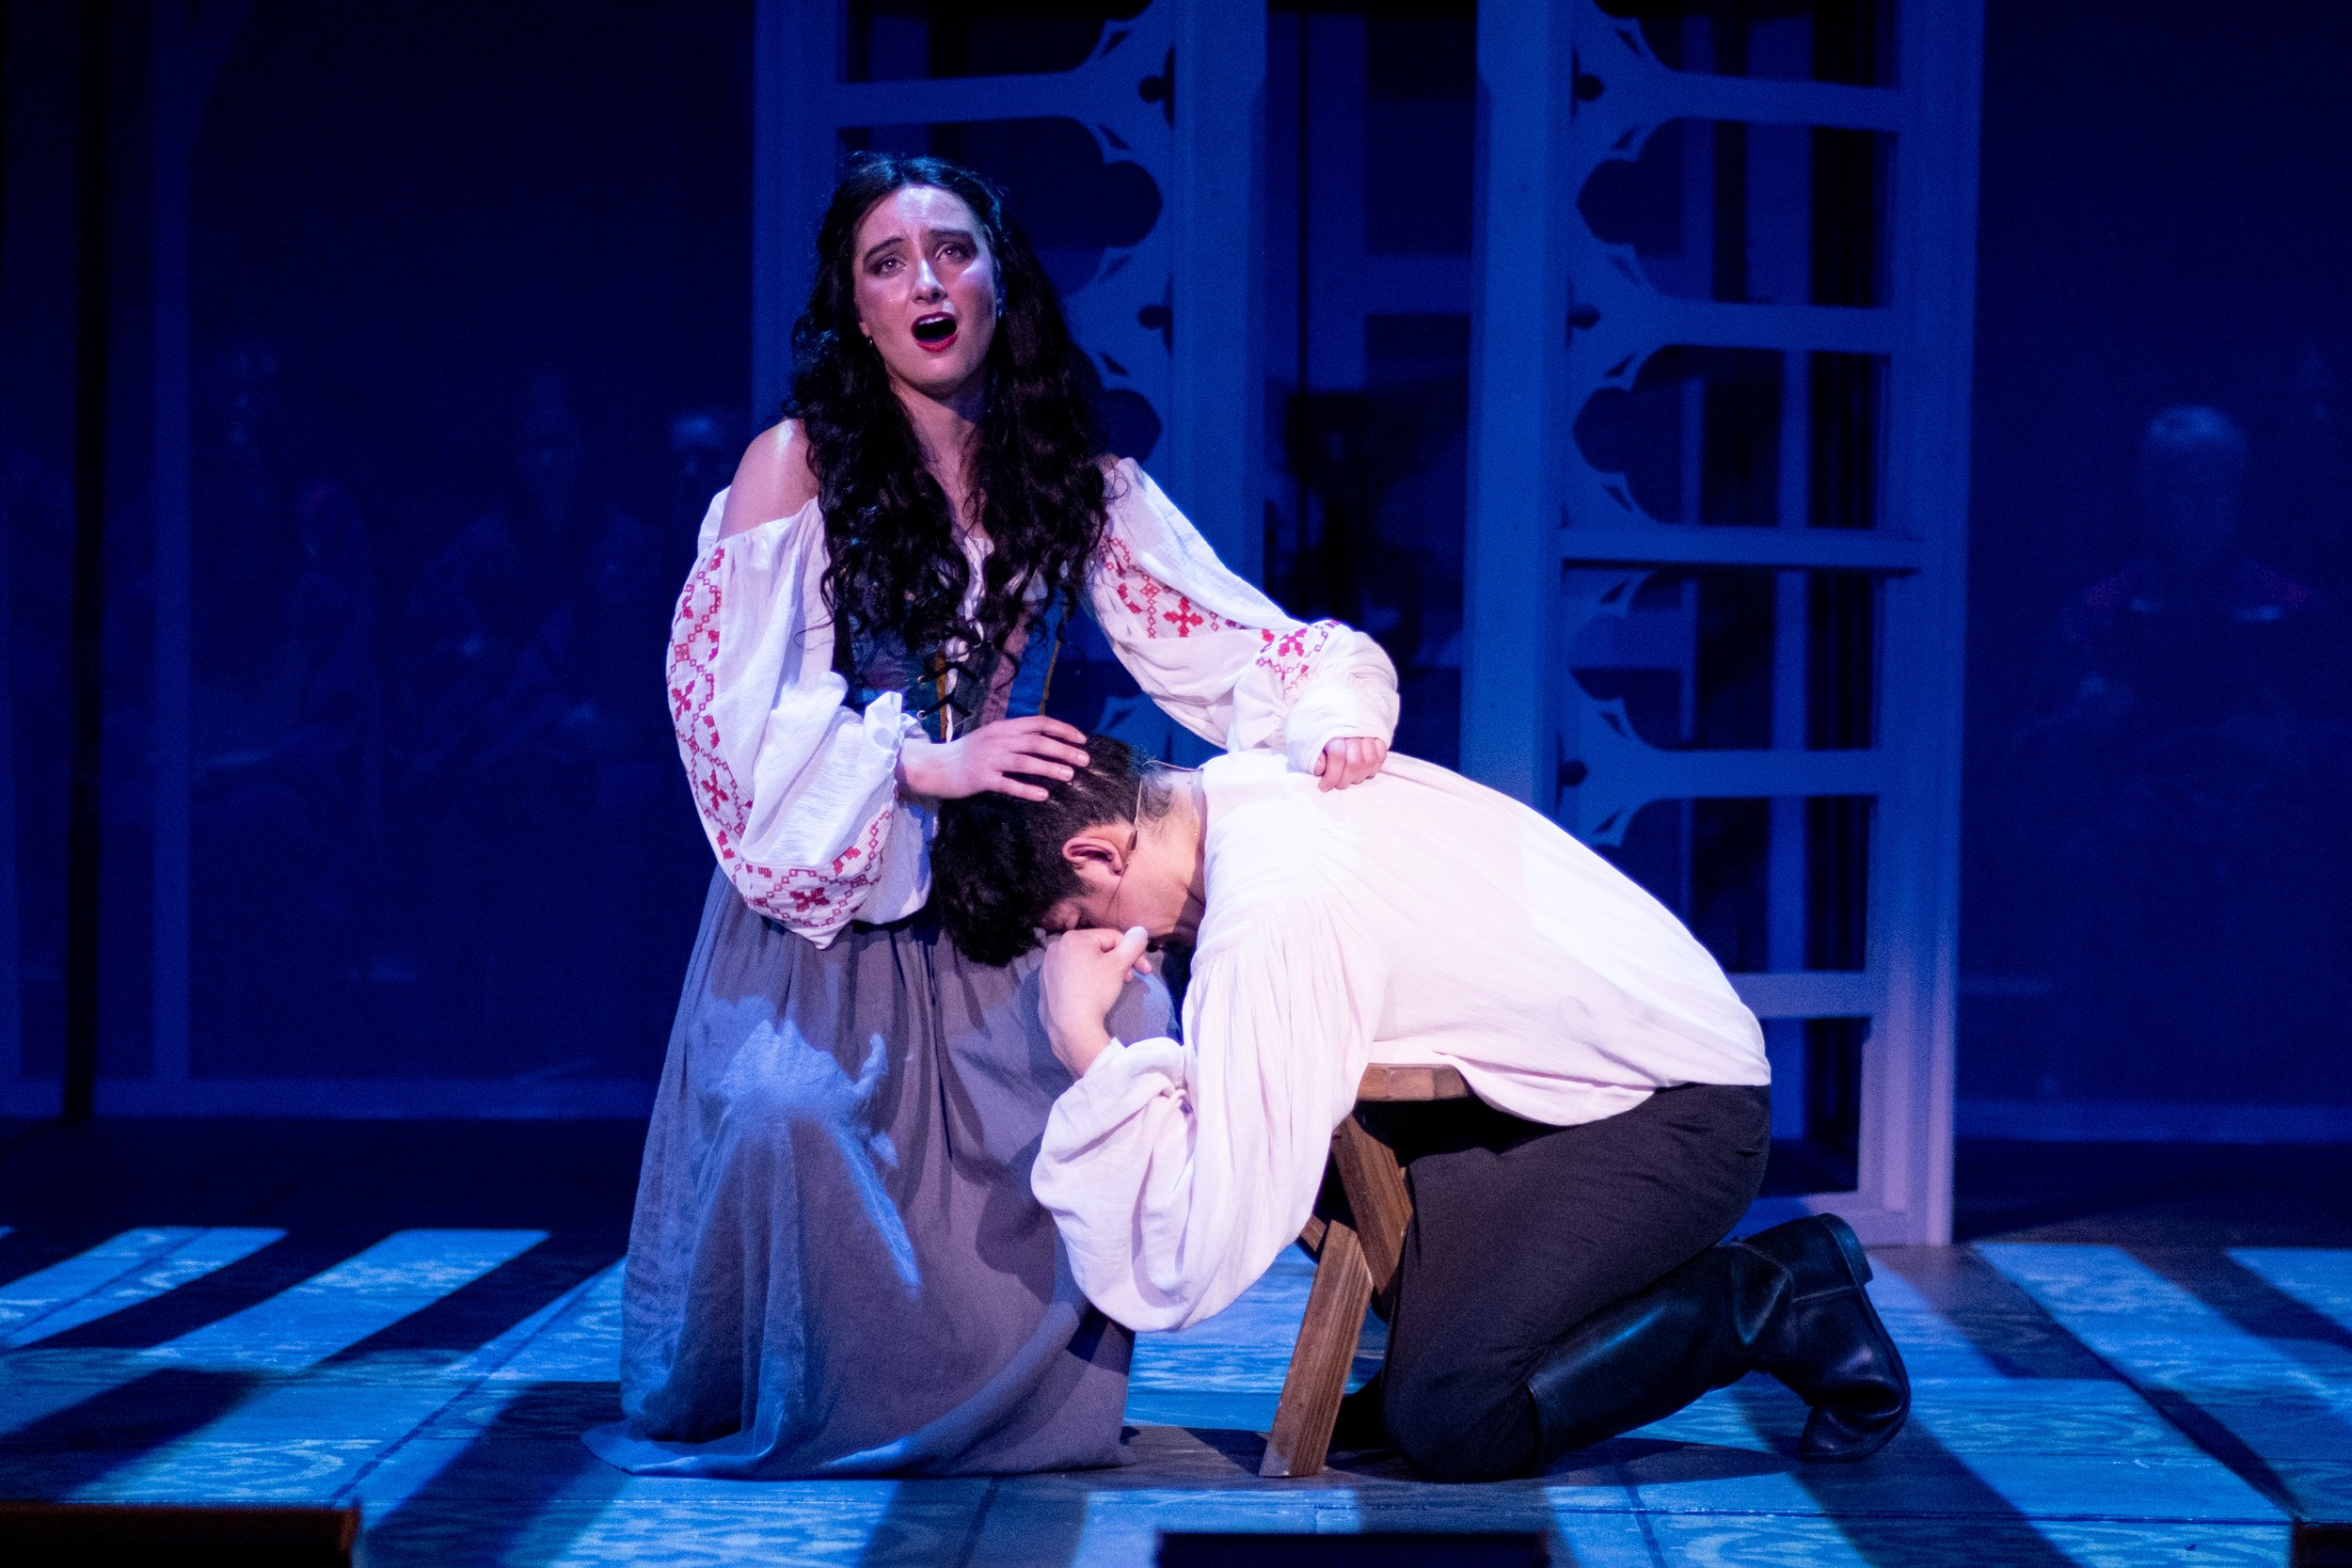  Esmeralda, played by Tayla Sindel, sings woefully while Captain Phoebus de Martin, played by Joseph Martinez, buries his head in her lap in light of the tragedy they have found themselves in during the musical production, The Hunchback of Notre Dame